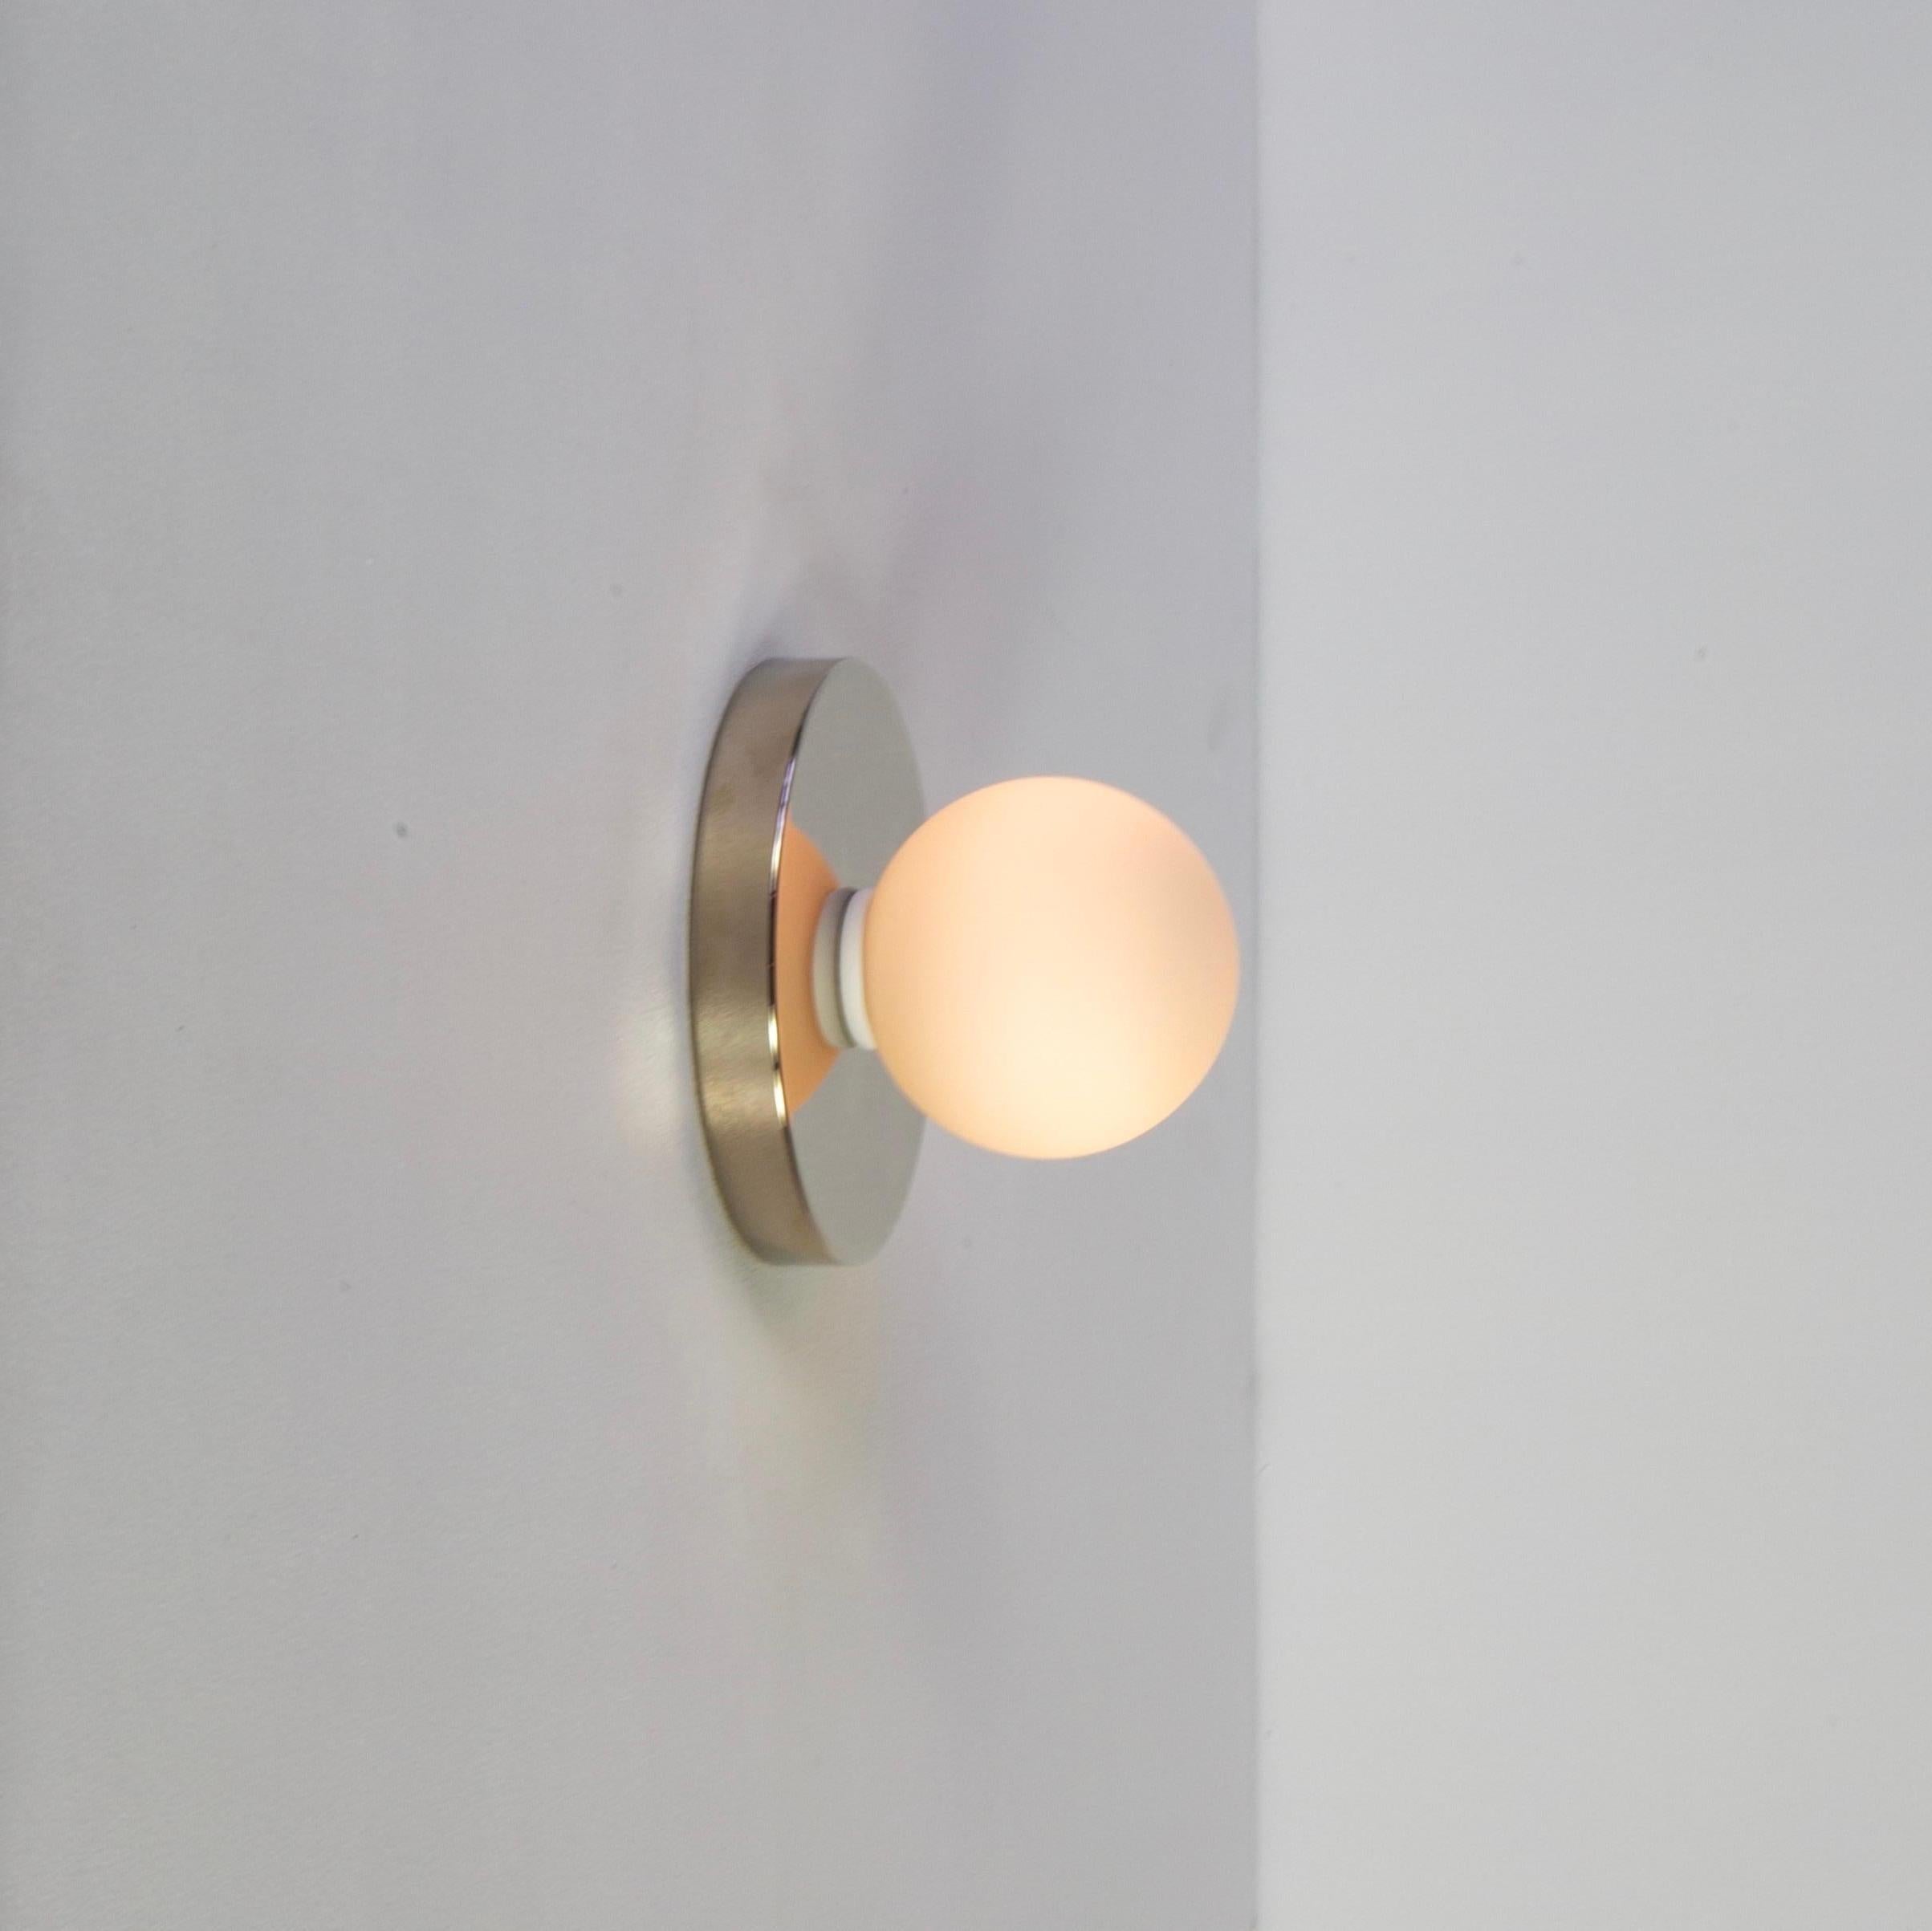 Plated Pair of Globe Sconces by Research.Lighting, Polished Nickel, In Stock For Sale